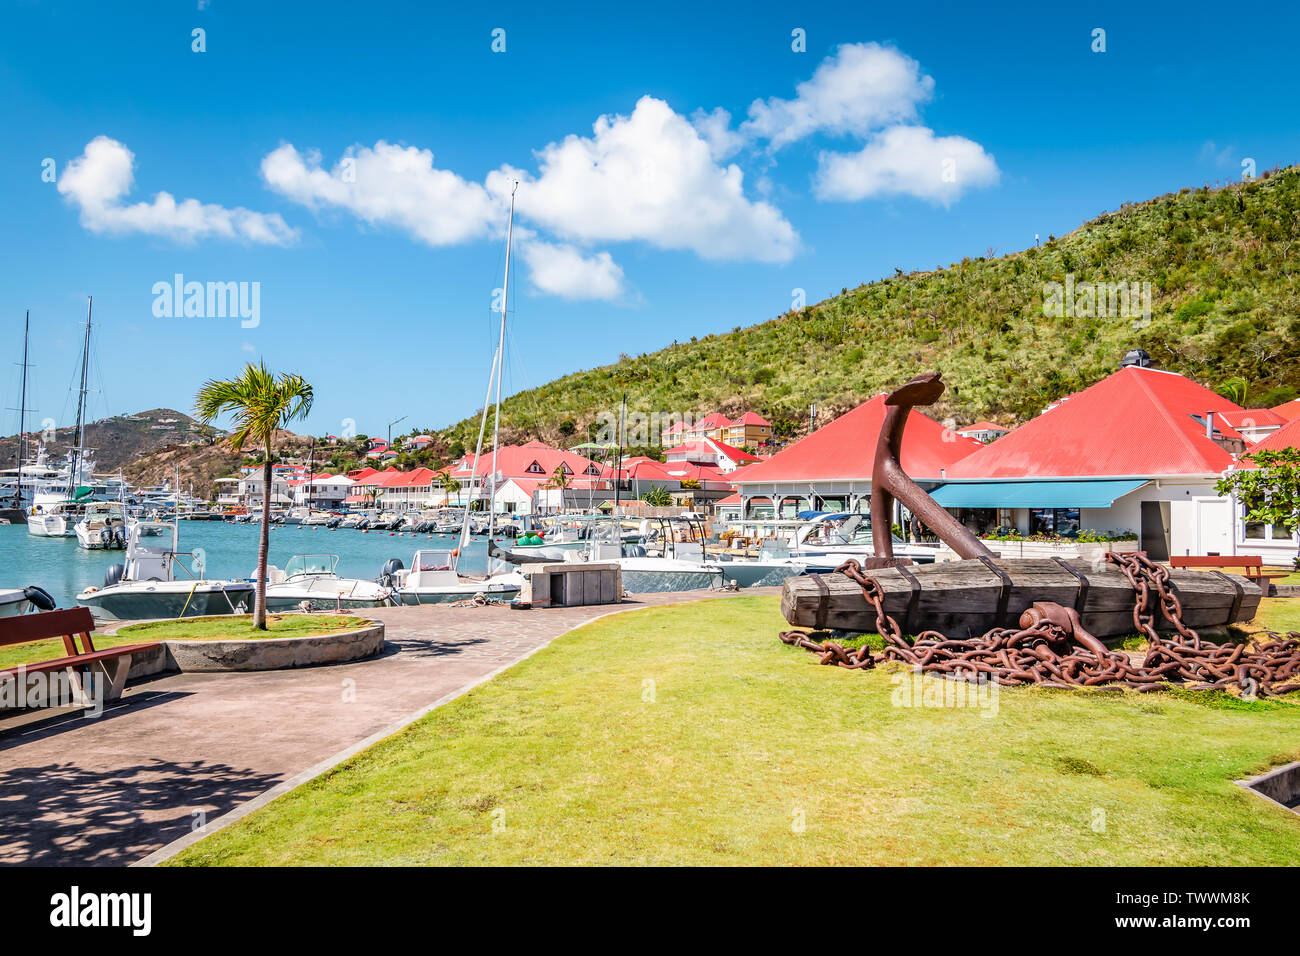 Gustavia, harbor landscape with red rooftop buildings. Saint Barthelemy, St Barts, St Barths. Stock Photo